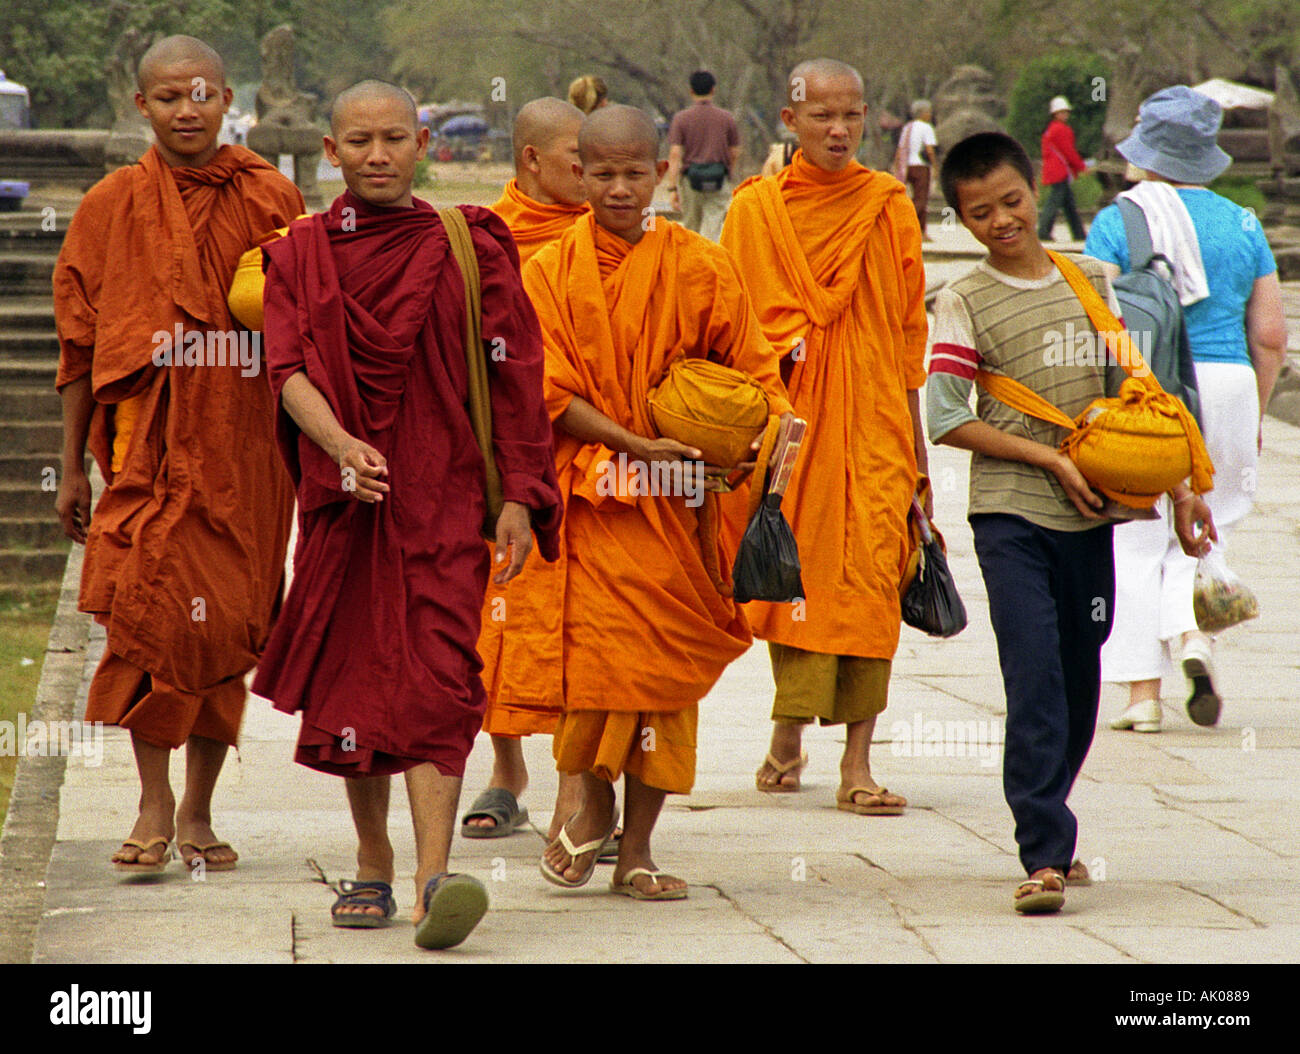 Group of young shaved head novices traditional colourful robe walk stoic march together Angkor Wat Cambodia Southeast Asia Stock Photo